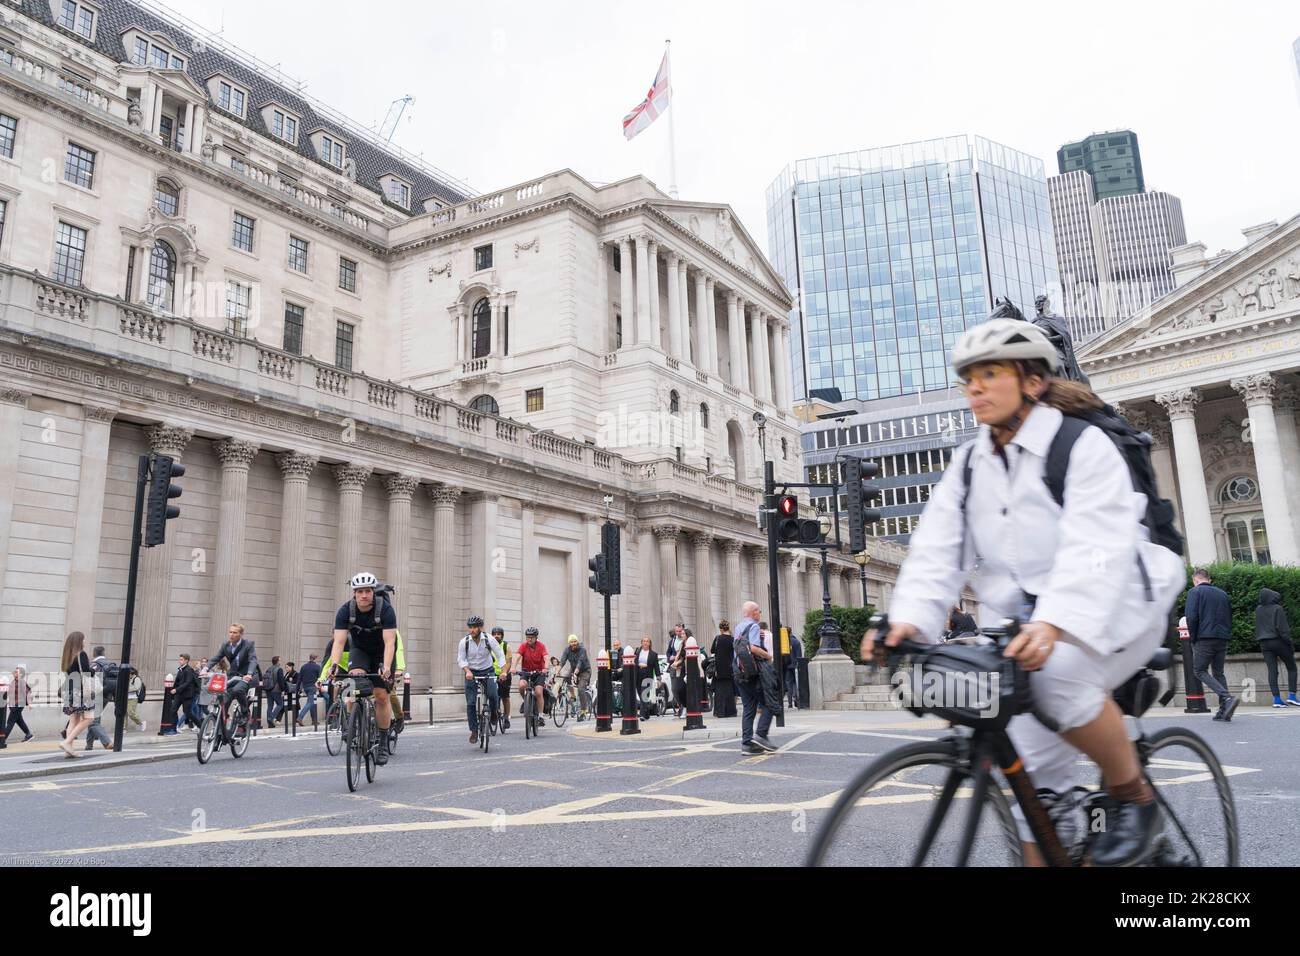 London UK, 22nd September 2022.  Bank of England building in the city o f London. BoE base interest rate on Thursday from 1.75 per cent to 2.25 per cent - the highest level in 14 years since November 2008, in order to combat the cost-of-living crisis.  Credit: Xiu Bao/Alamy Live News Stock Photo